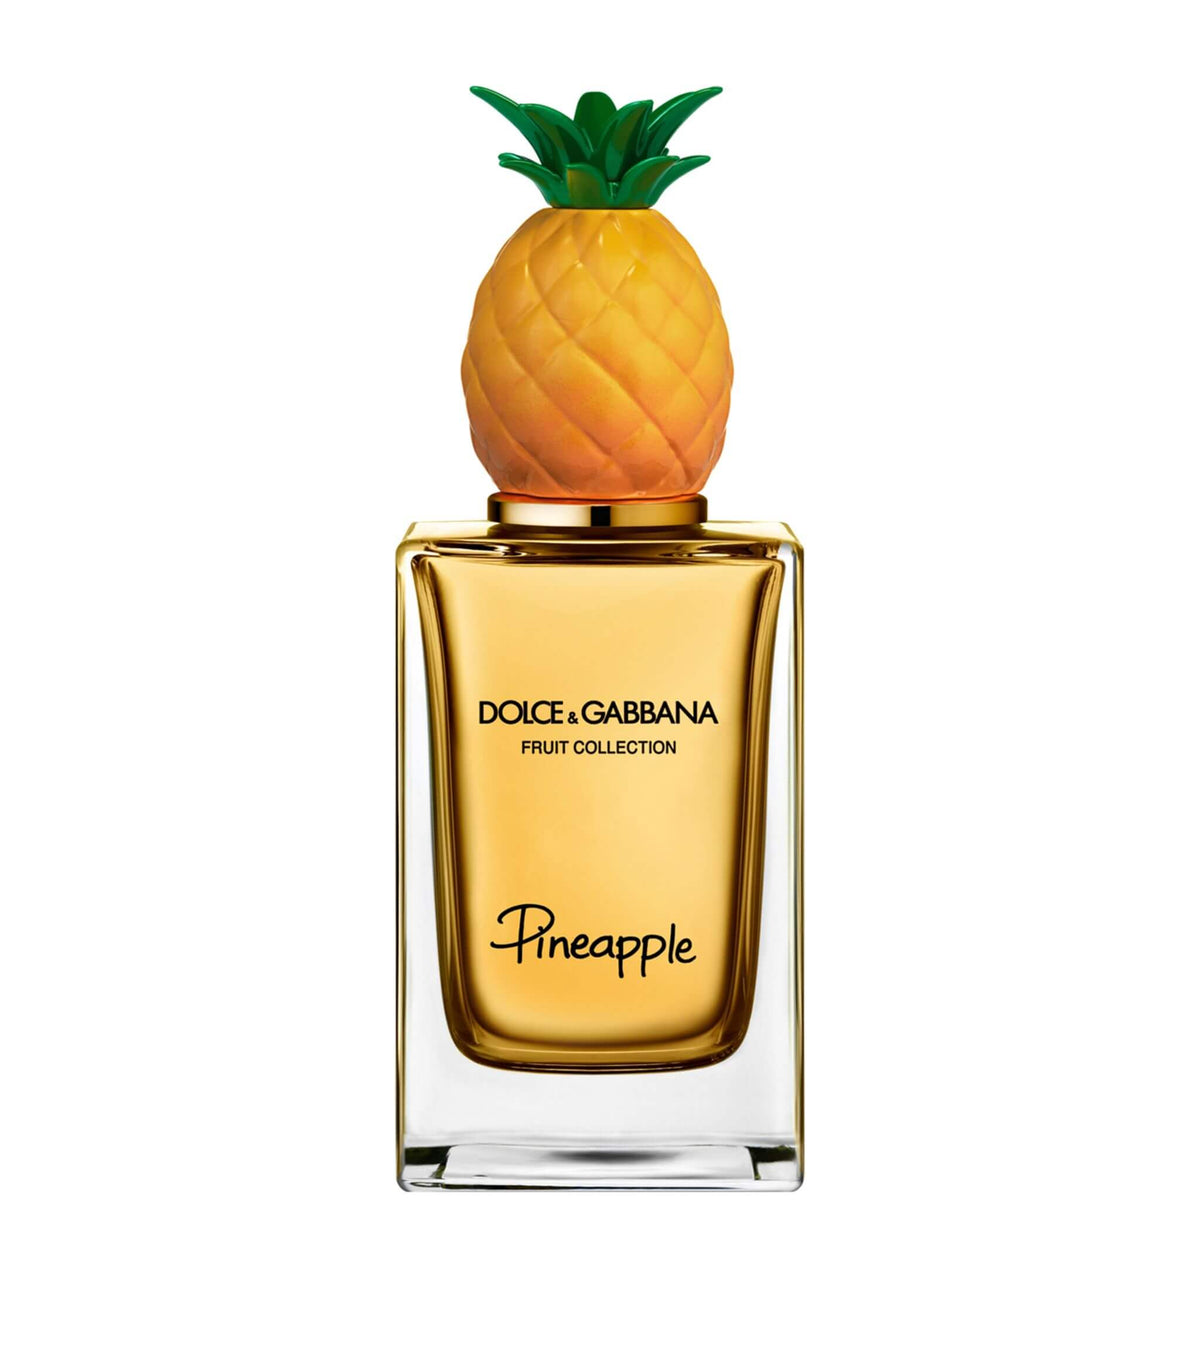 Dolce & Gabbana Fruit Collection - Pineapple 150ml